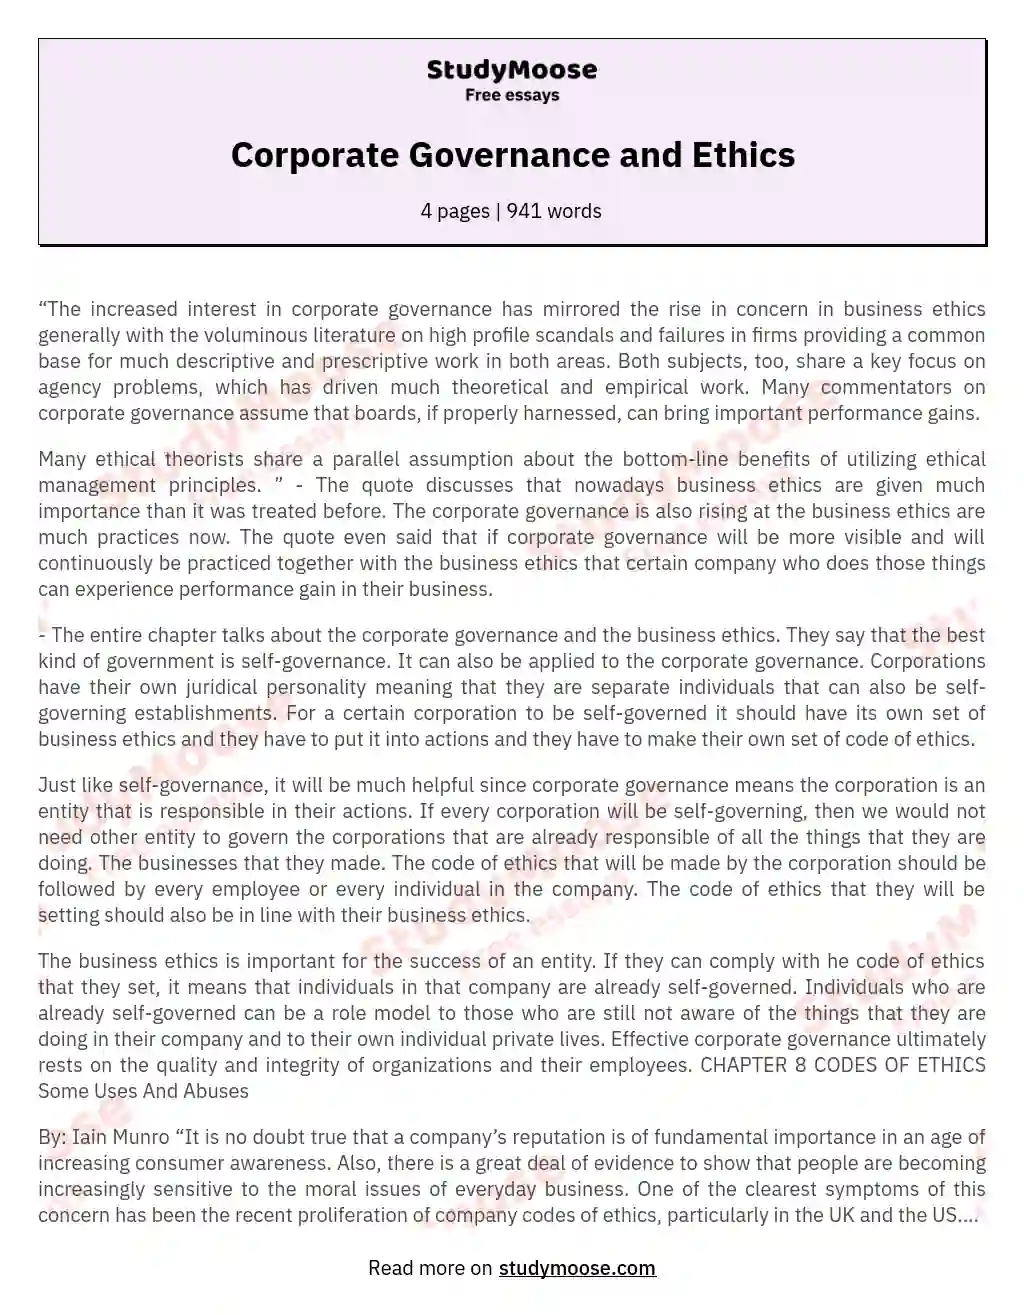 Corporate Governance and Ethics essay